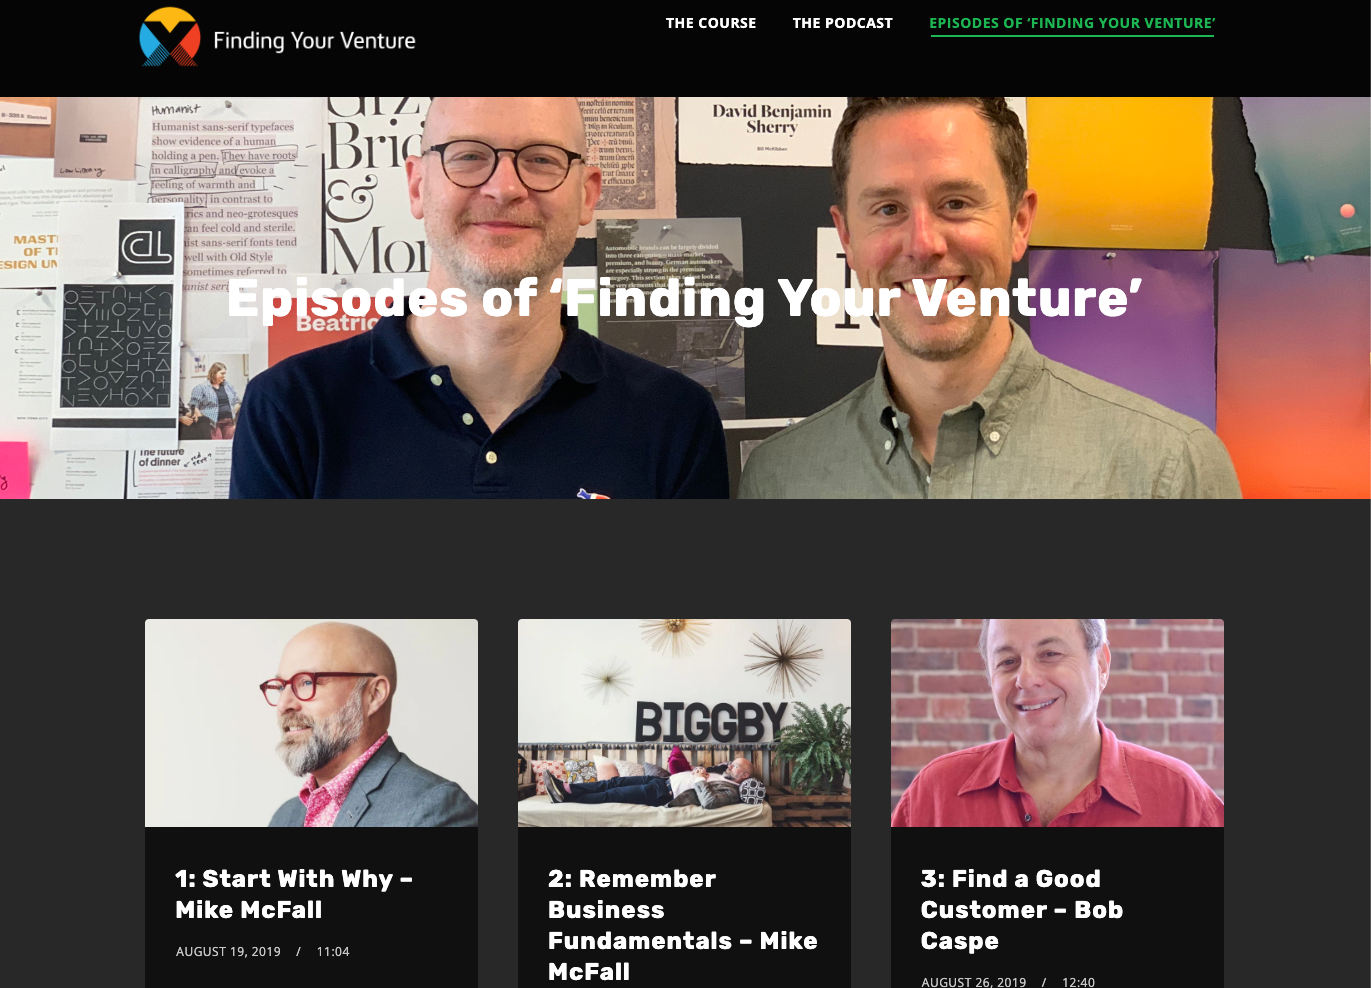 Homepage of the Finding Your Venture Podcast website